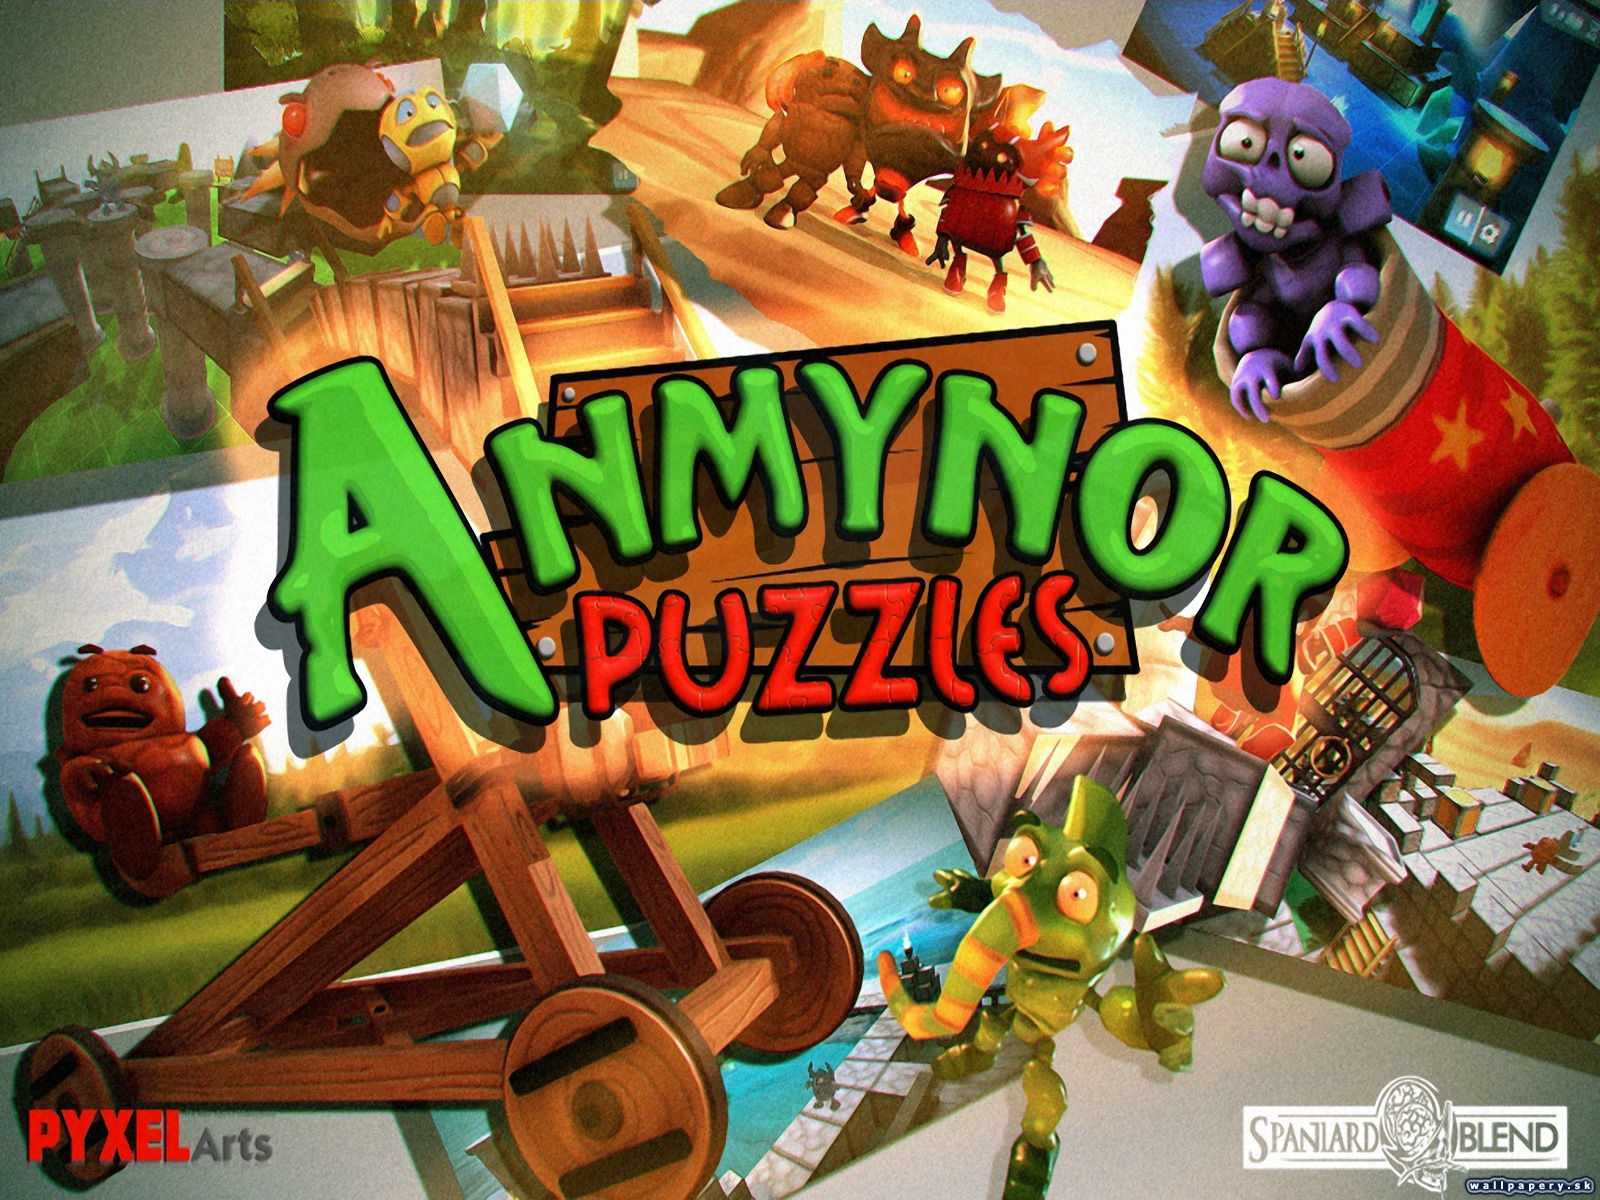 Anmynor Puzzles - wallpaper 2